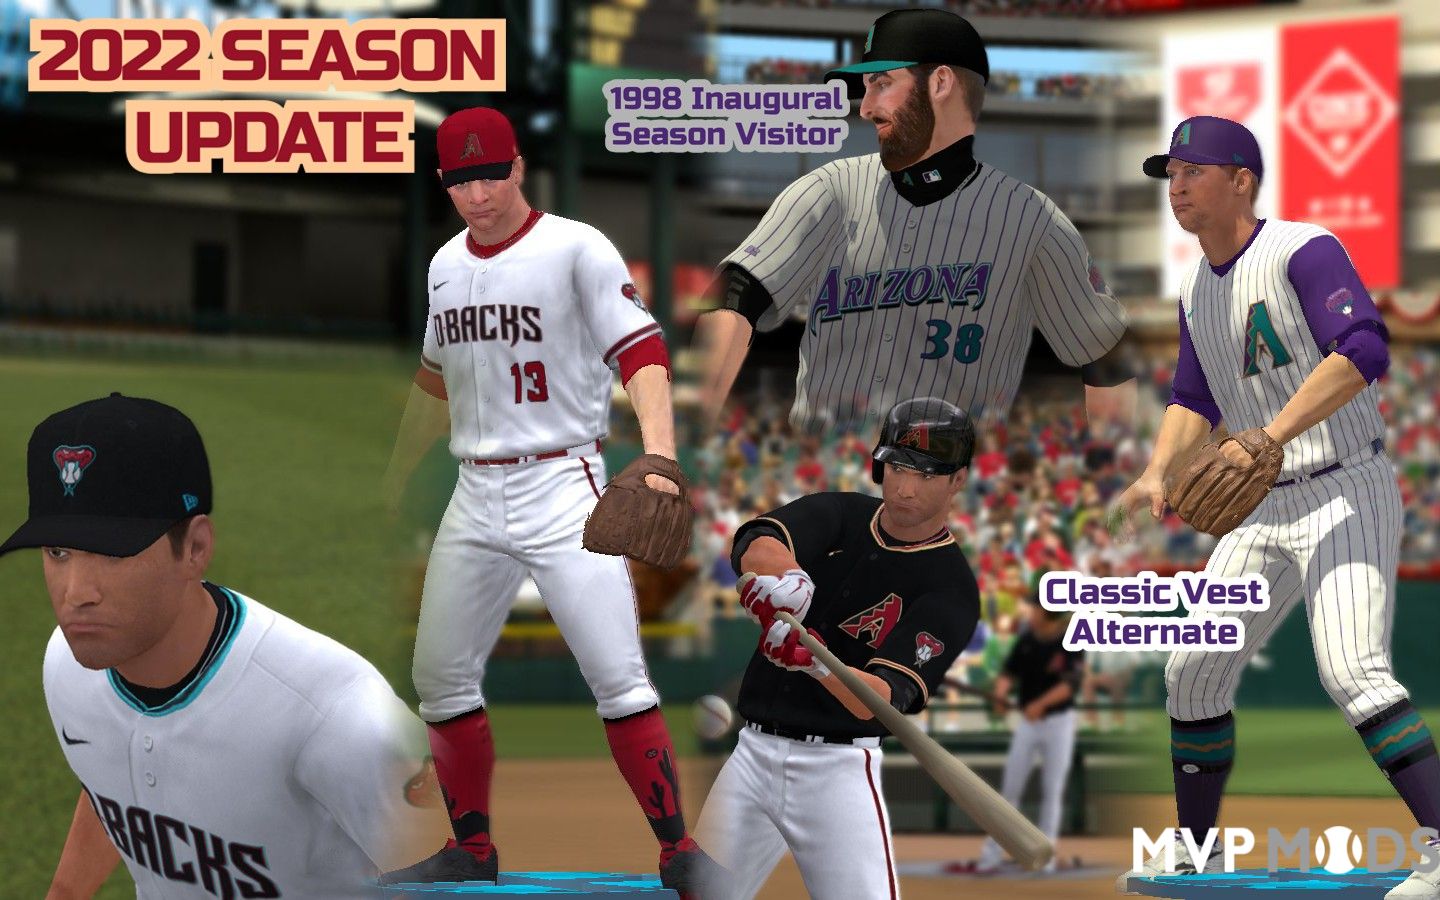 Holiday-themed D-backs uniform set has been released